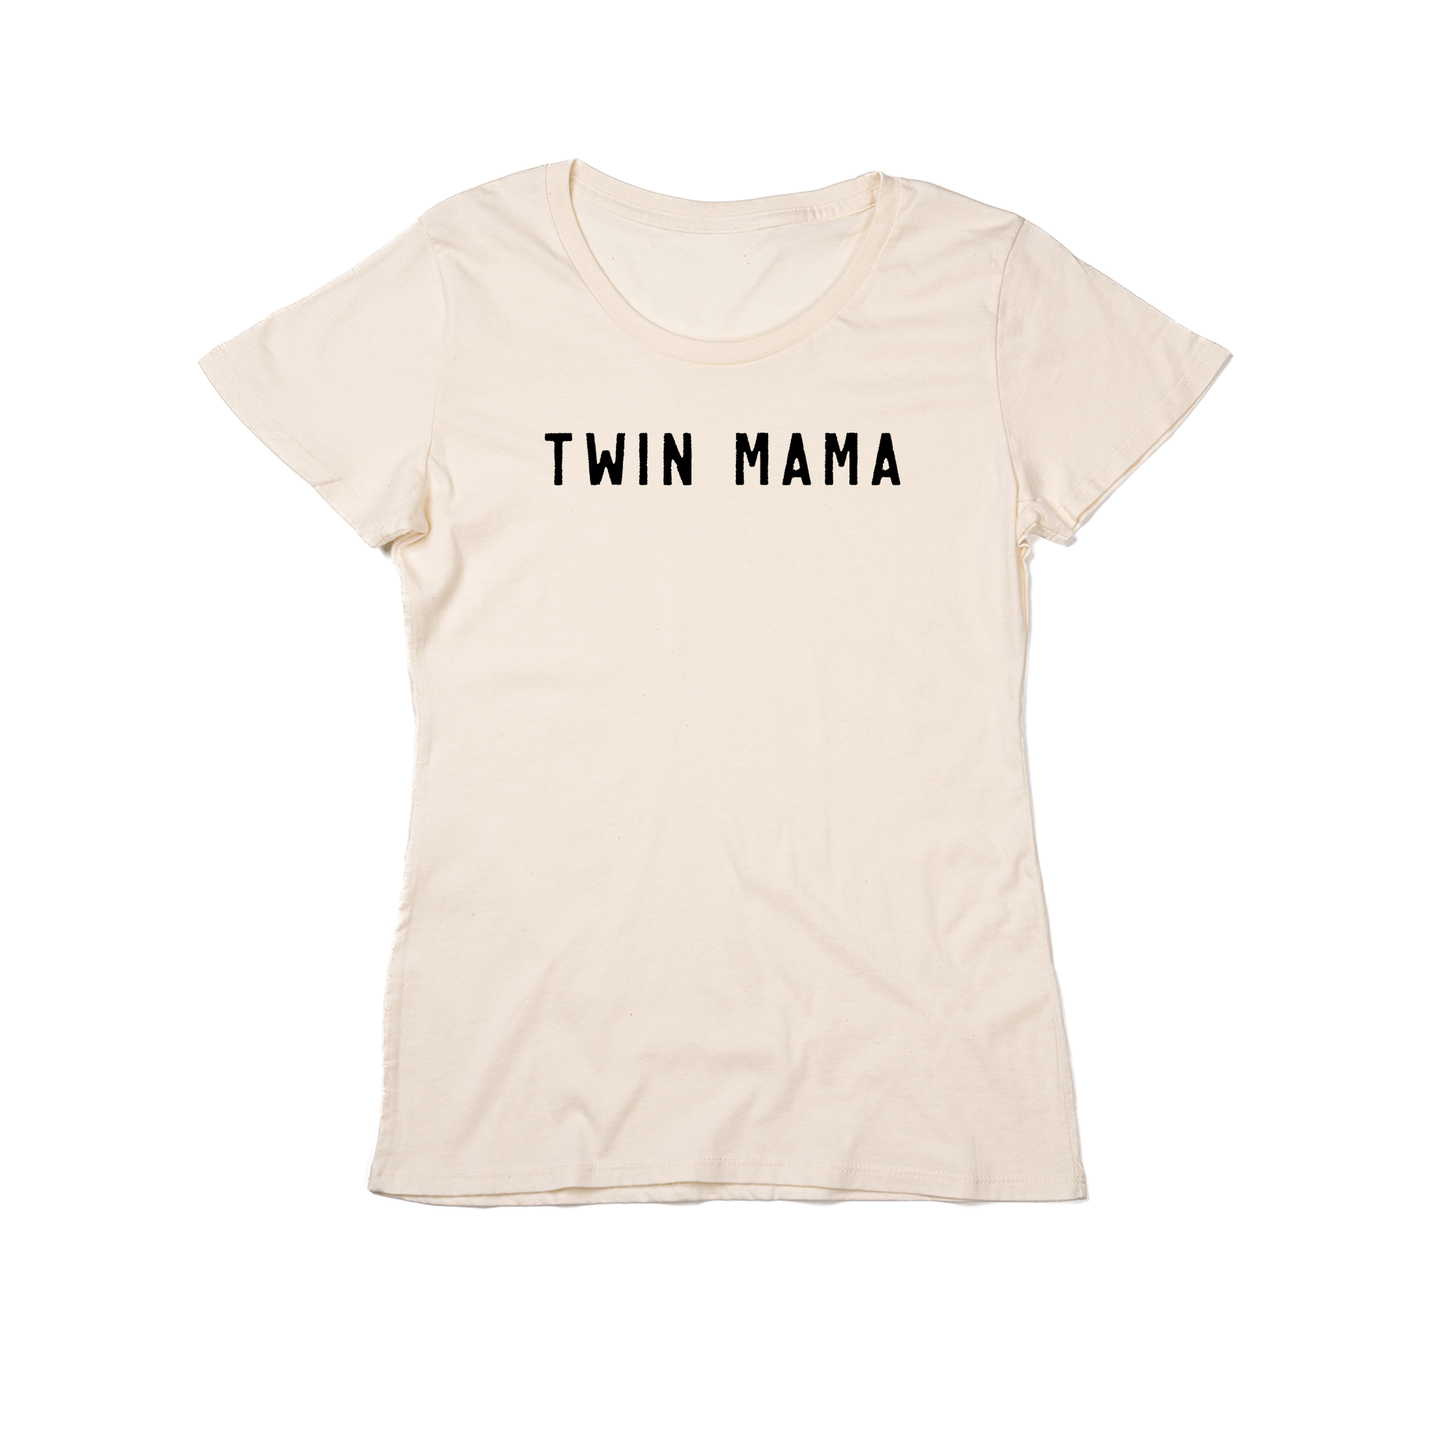 Twin Mama (Black) - Women's Fitted Tee (Natural)